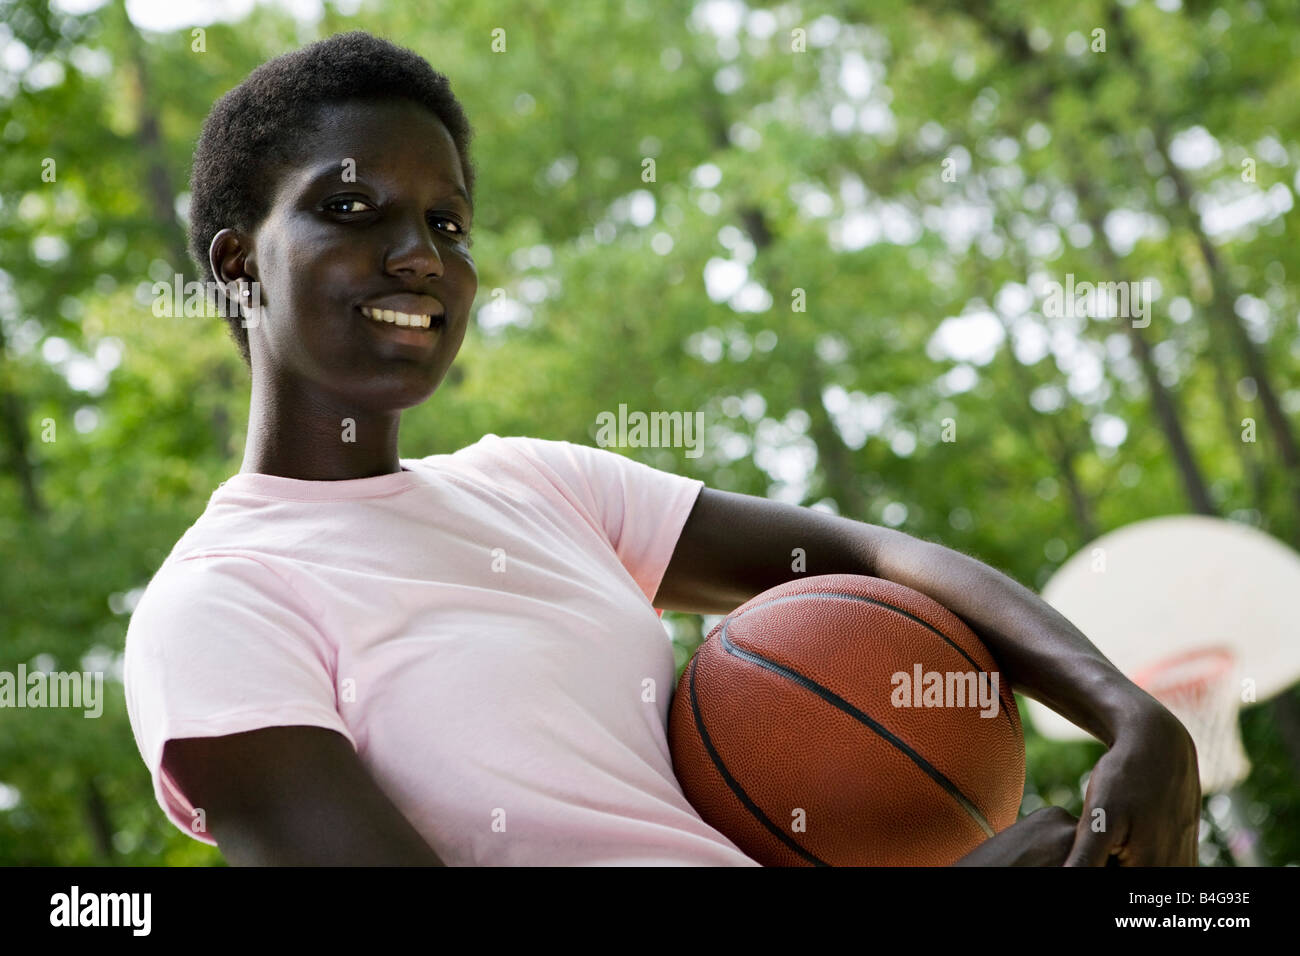 A young woman holding a basketball, outdoors Stock Photo